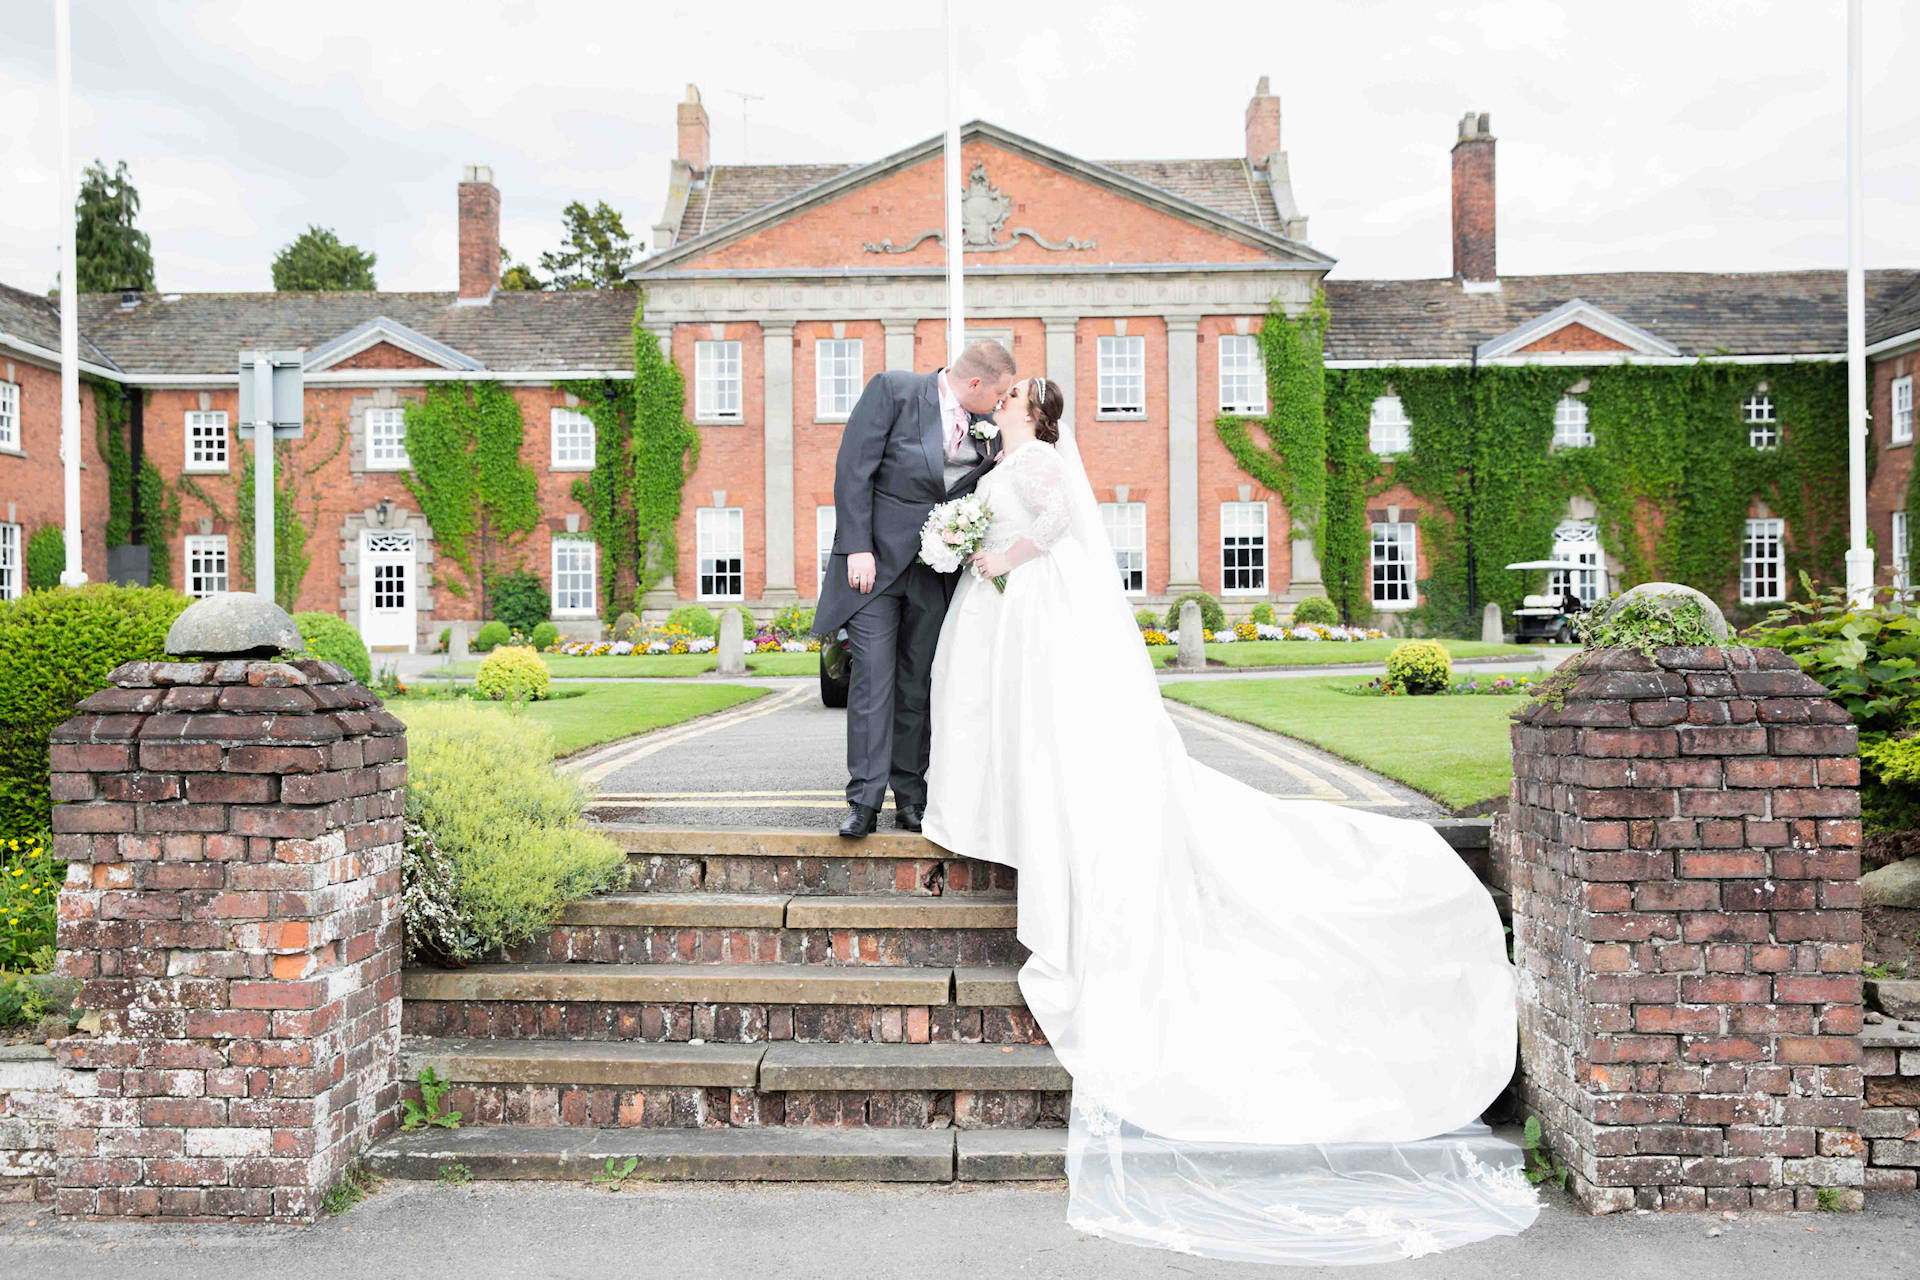 Bride & Groom in front of a stately home in Yorkshire